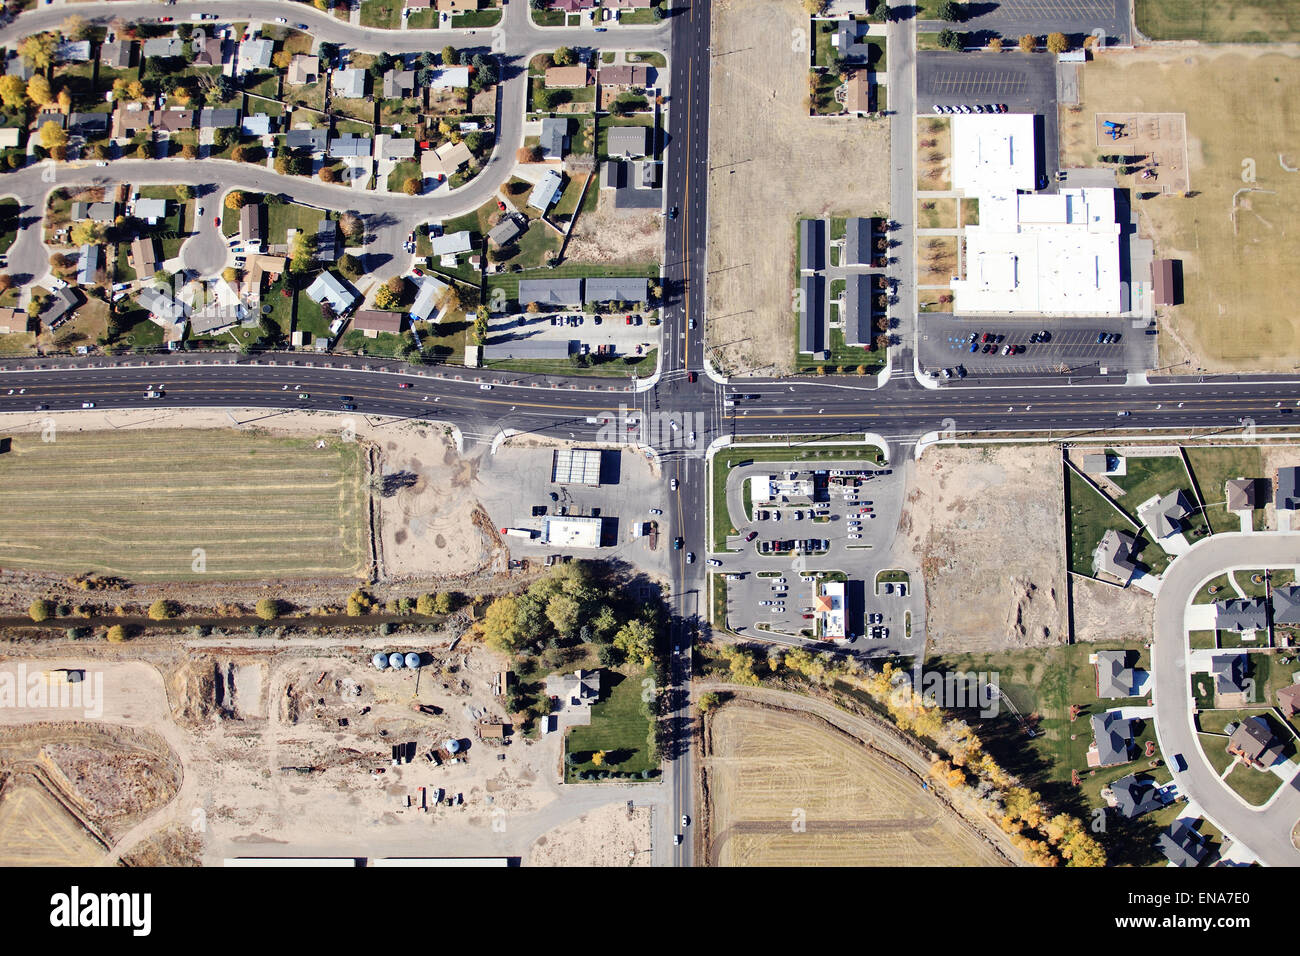 An aerial view of an eight lane intersection in a mid mid-sized city. Stock Photo